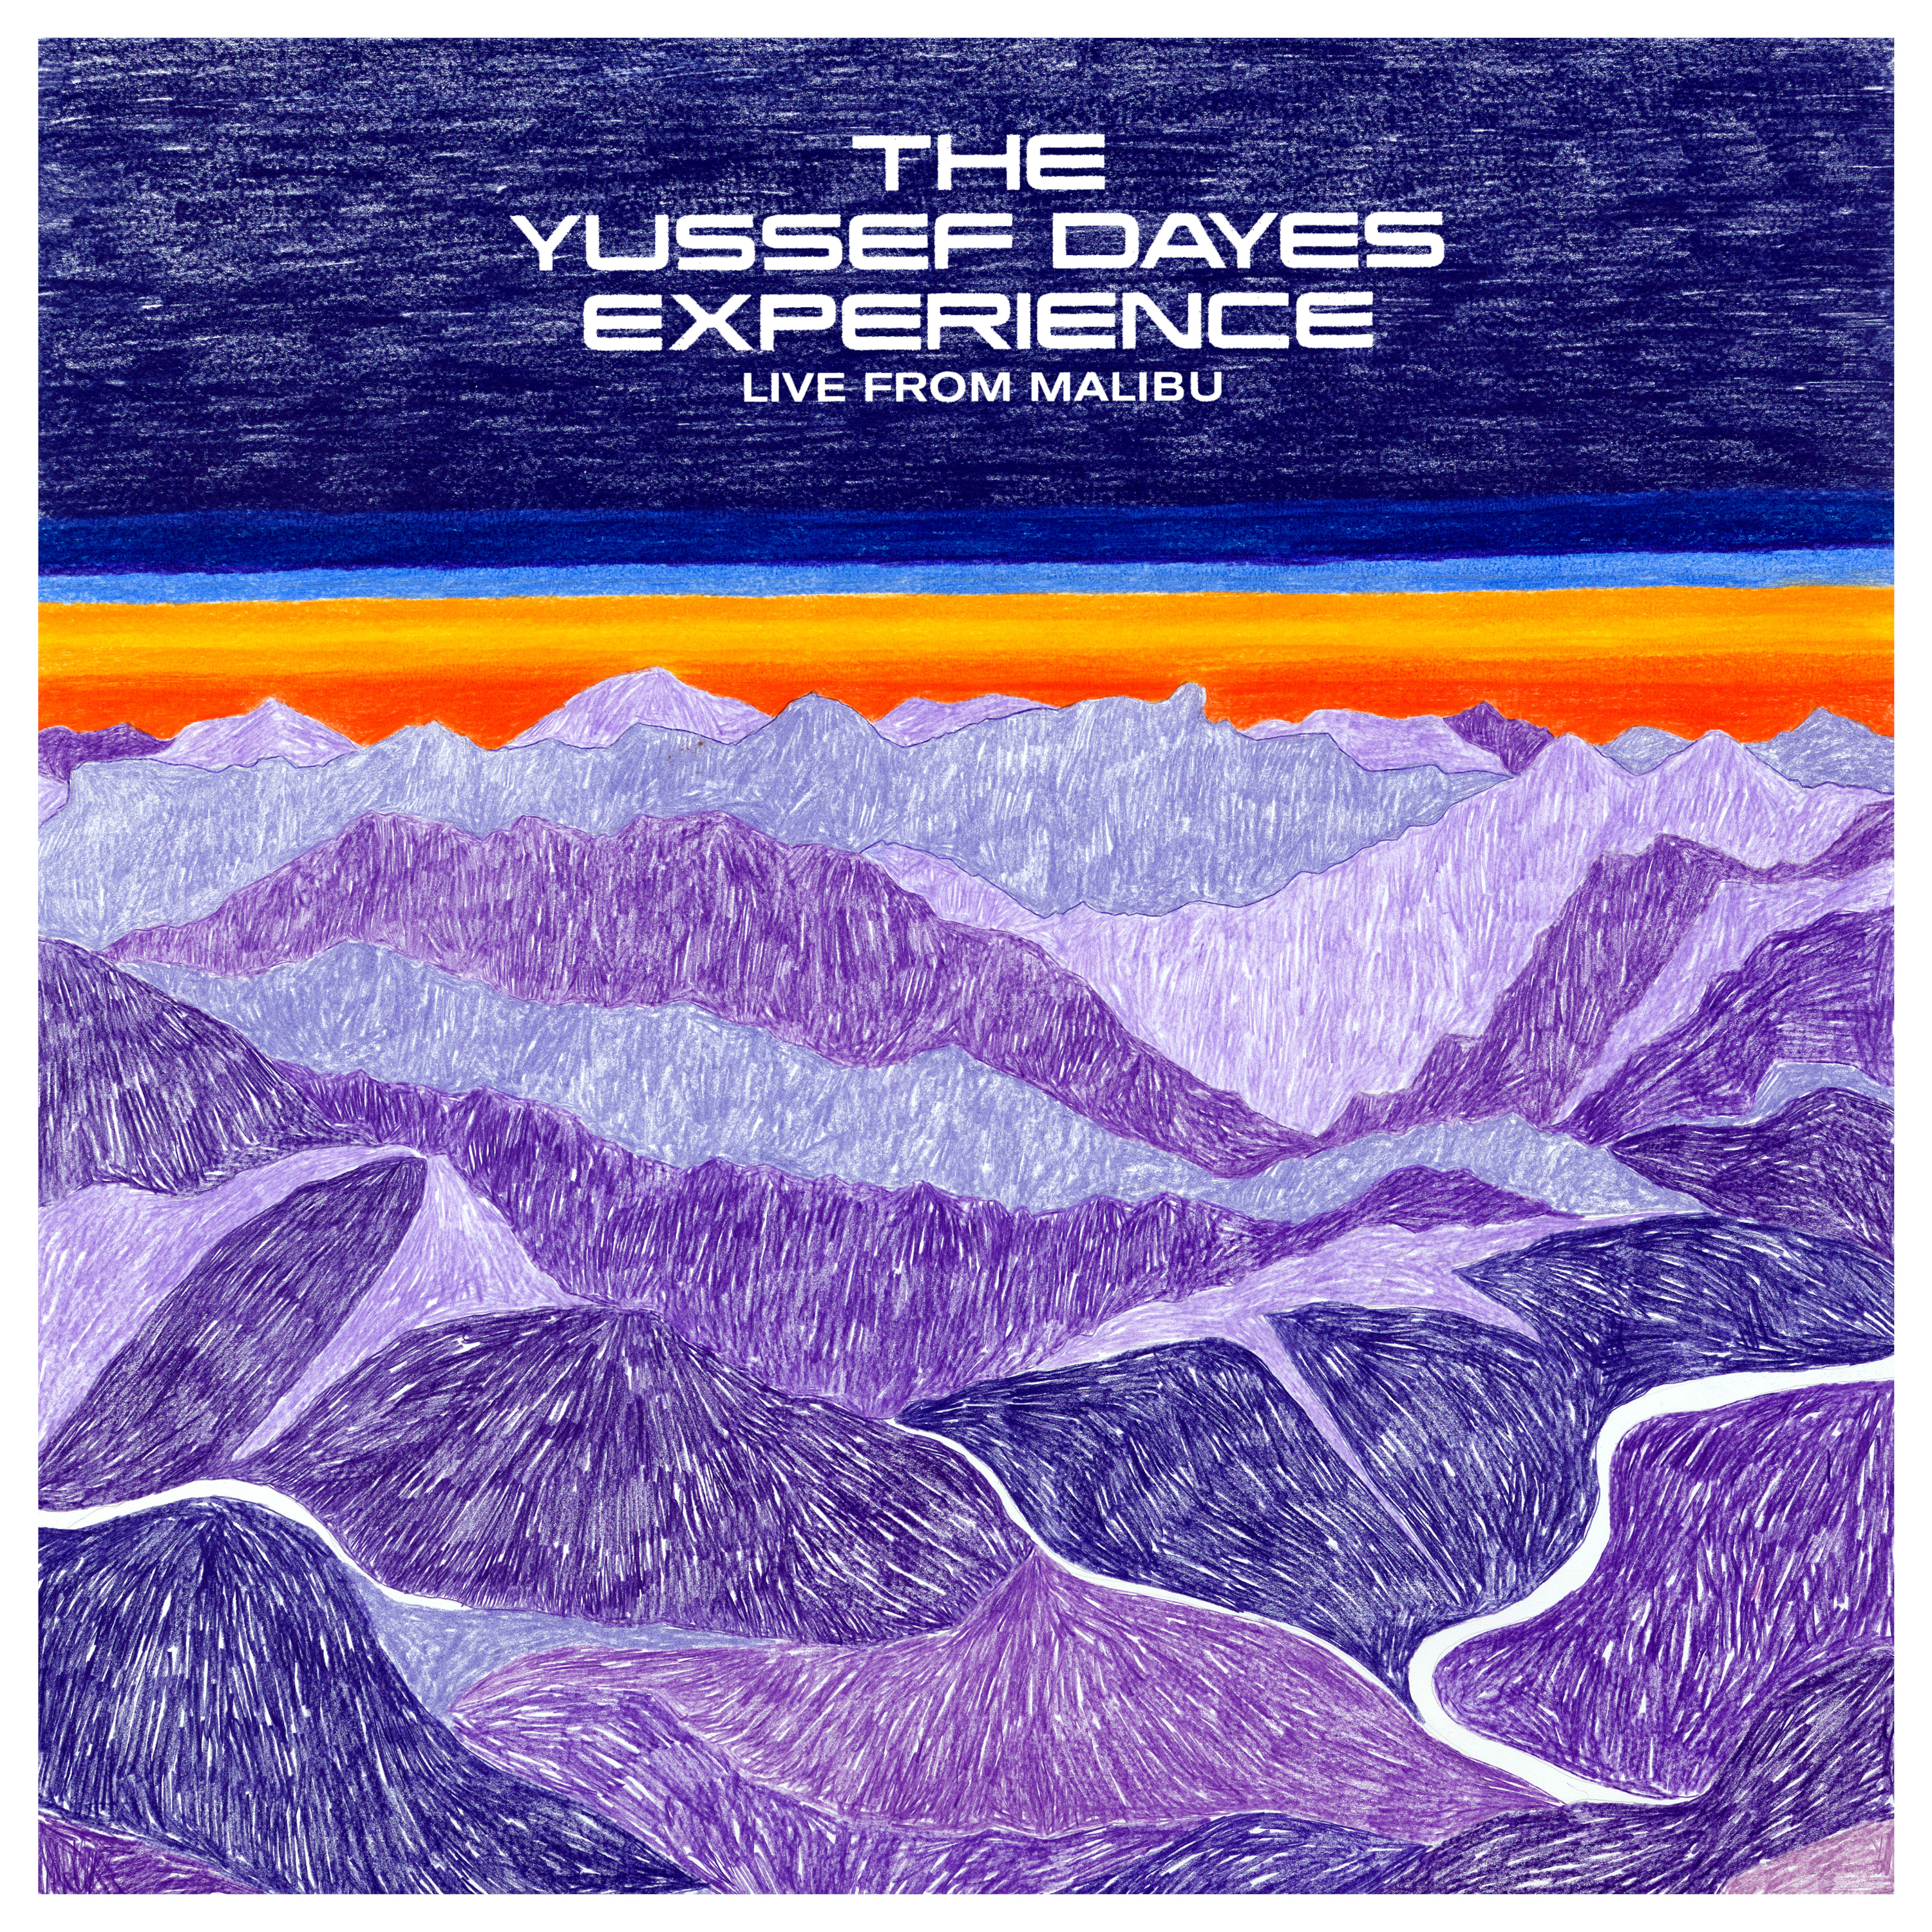 YUSSEF DAYES YUSSEF DAYES EXPERIENCE - LIVE FROM MALIBU (Vinyl) (US IMPORT) - Picture 1 of 1